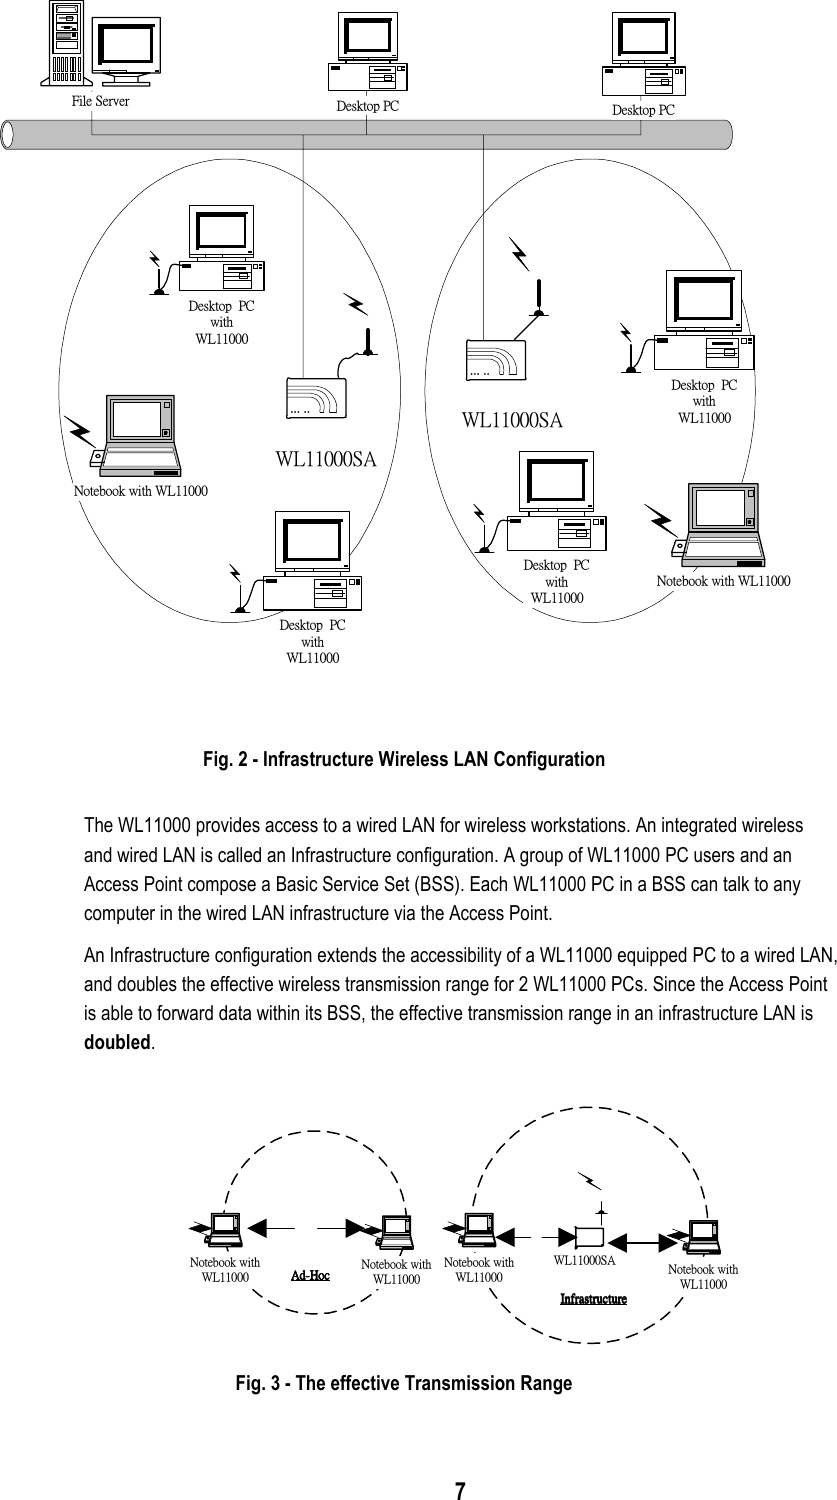 7Fig. 2 - Infrastructure Wireless LAN ConfigurationThe WL11000 provides access to a wired LAN for wireless workstations. An integrated wirelessand wired LAN is called an Infrastructure configuration. A group of WL11000 PC users and anAccess Point compose a Basic Service Set (BSS). Each WL11000 PC in a BSS can talk to anycomputer in the wired LAN infrastructure via the Access Point.An Infrastructure configuration extends the accessibility of a WL11000 equipped PC to a wired LAN,and doubles the effective wireless transmission range for 2 WL11000 PCs. Since the Access Pointis able to forward data within its BSS, the effective transmission range in an infrastructure LAN isdoubled.Fig. 3 - The effective Transmission Range   